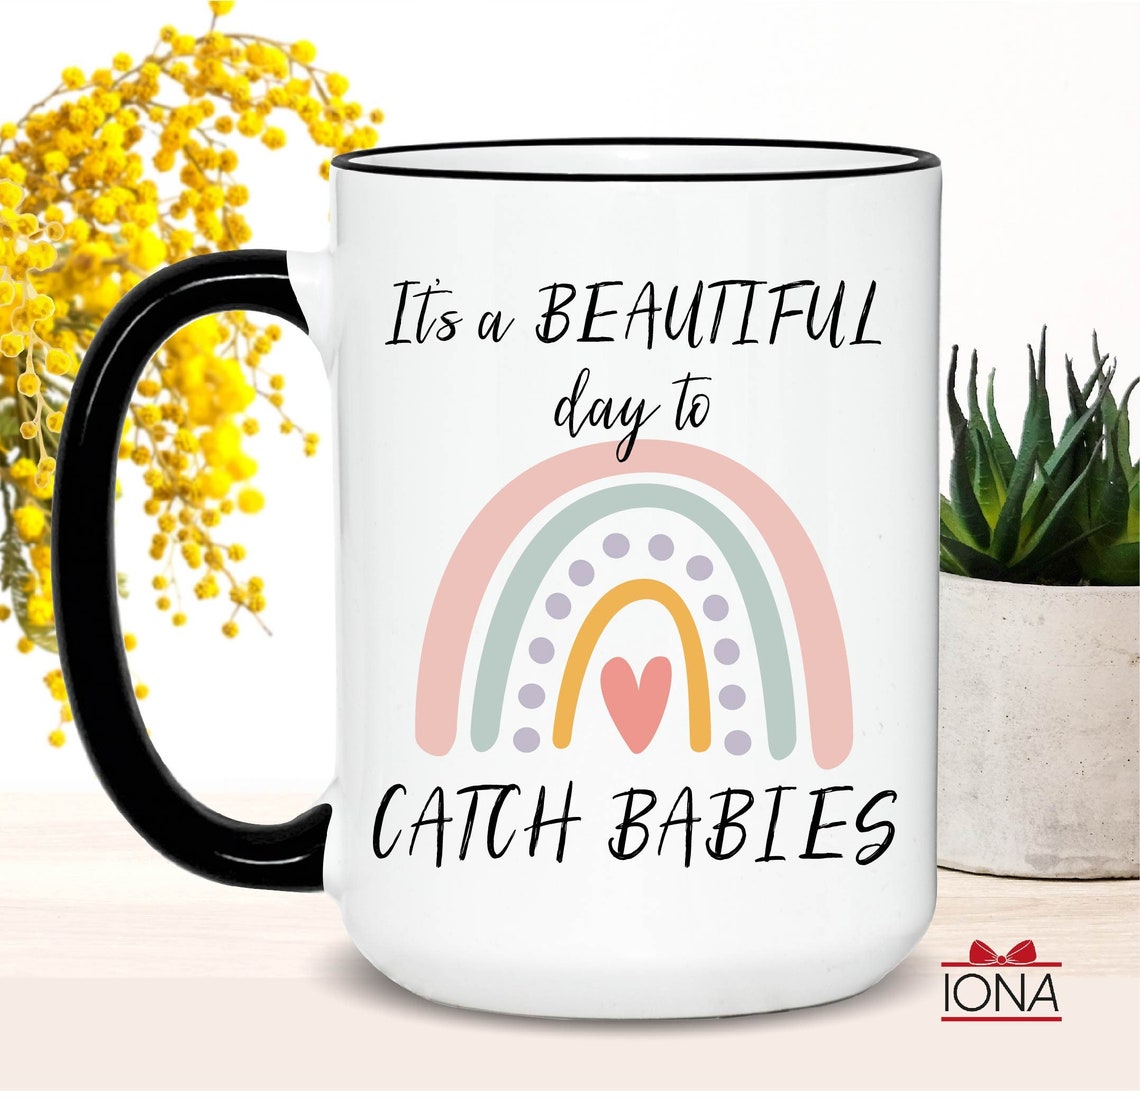 It's a beautiful day to catch babies Coffee Mug - Midwife Coffee Mug - Labor and Delivery Nurse Gift - Gift for OBGYN, Delivery Nurse